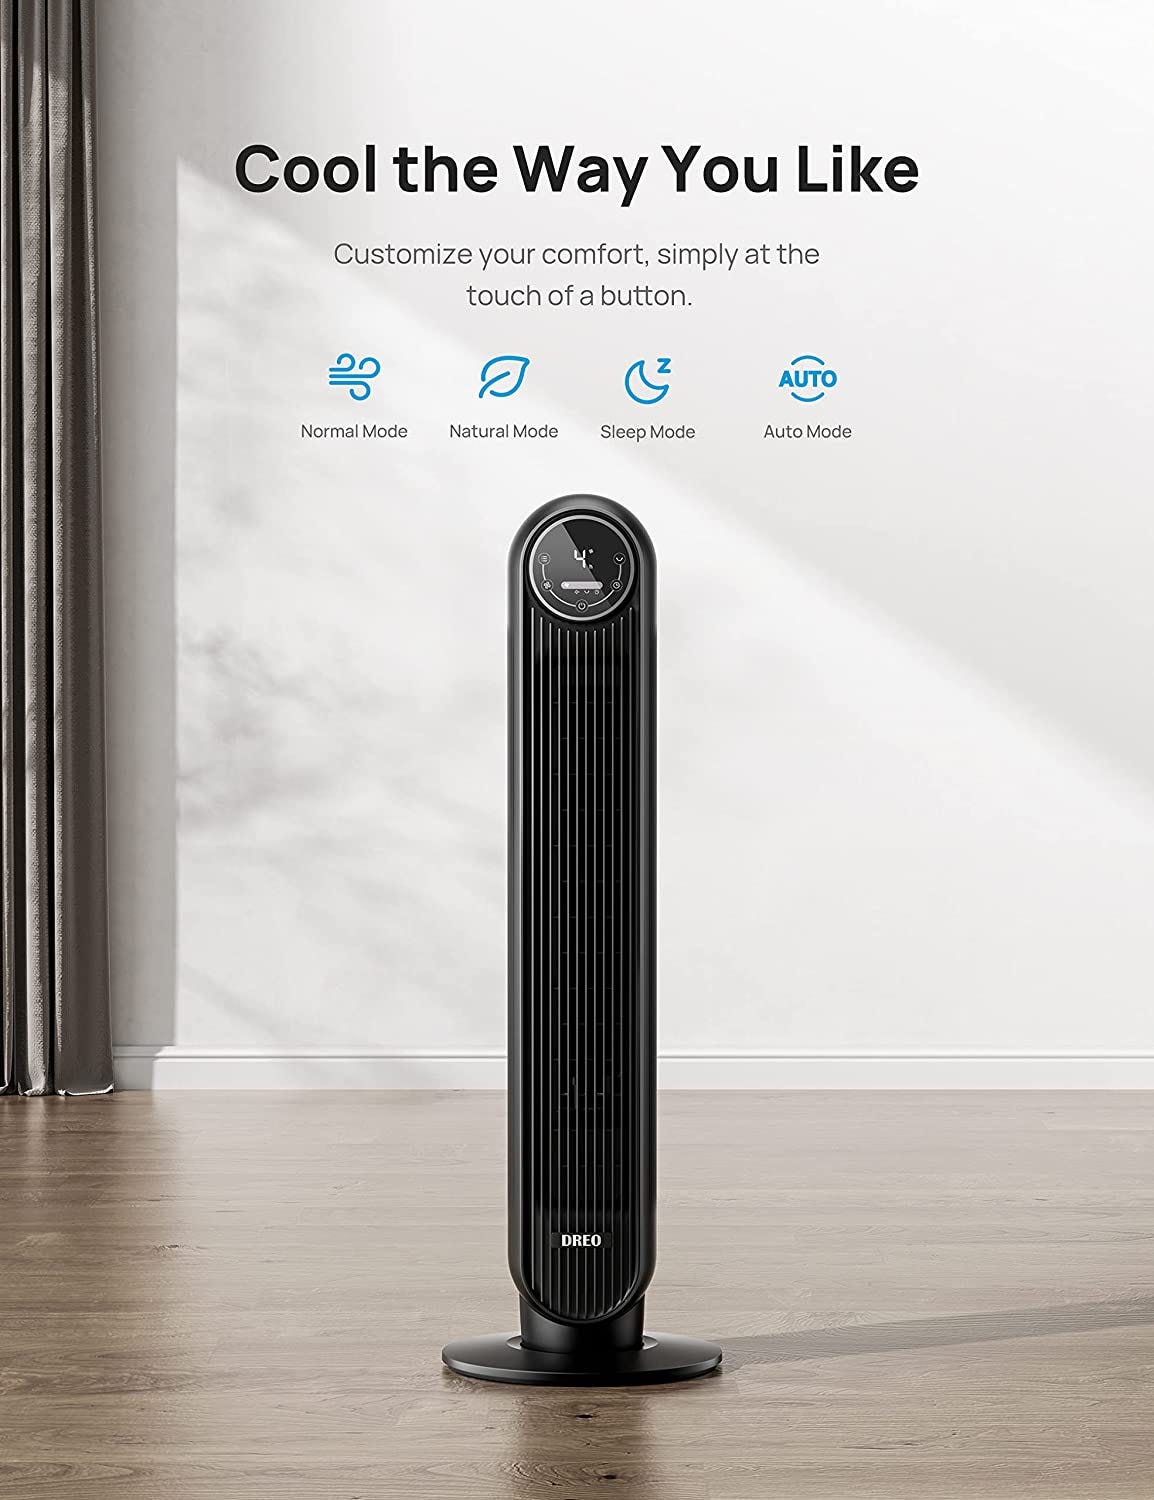 This Summer, stay cool and serene with the Dreo Nomad One Tower Fan:  powerful, portable, and quiet. | by Ayush | Medium